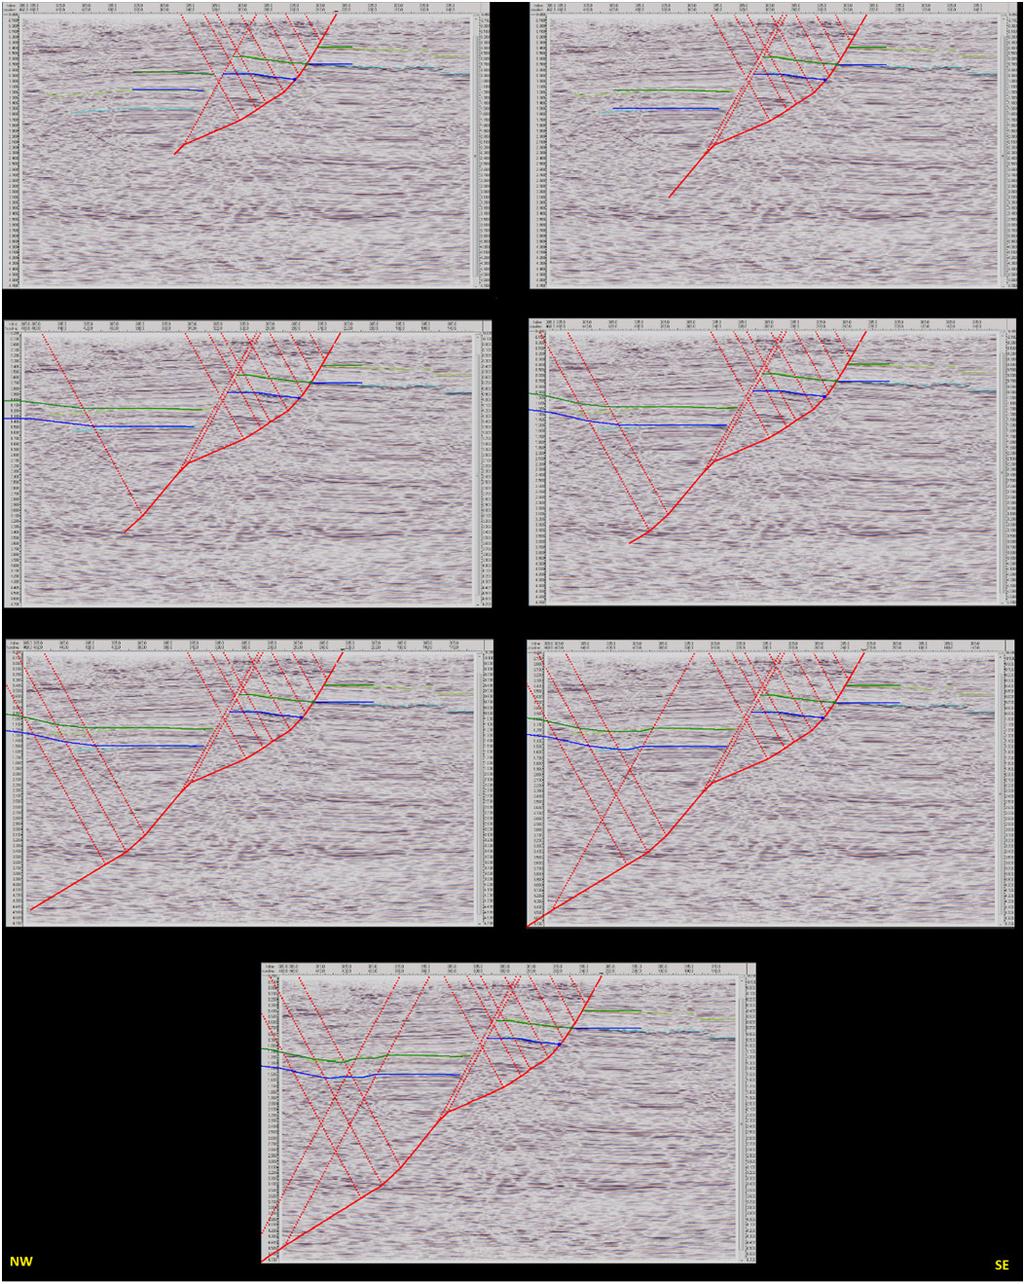 Fault prediction by forward modeling FIG. 8. Kinematic forward modeling for fault prediction. Light green and blue are interpreted seismic horizons.